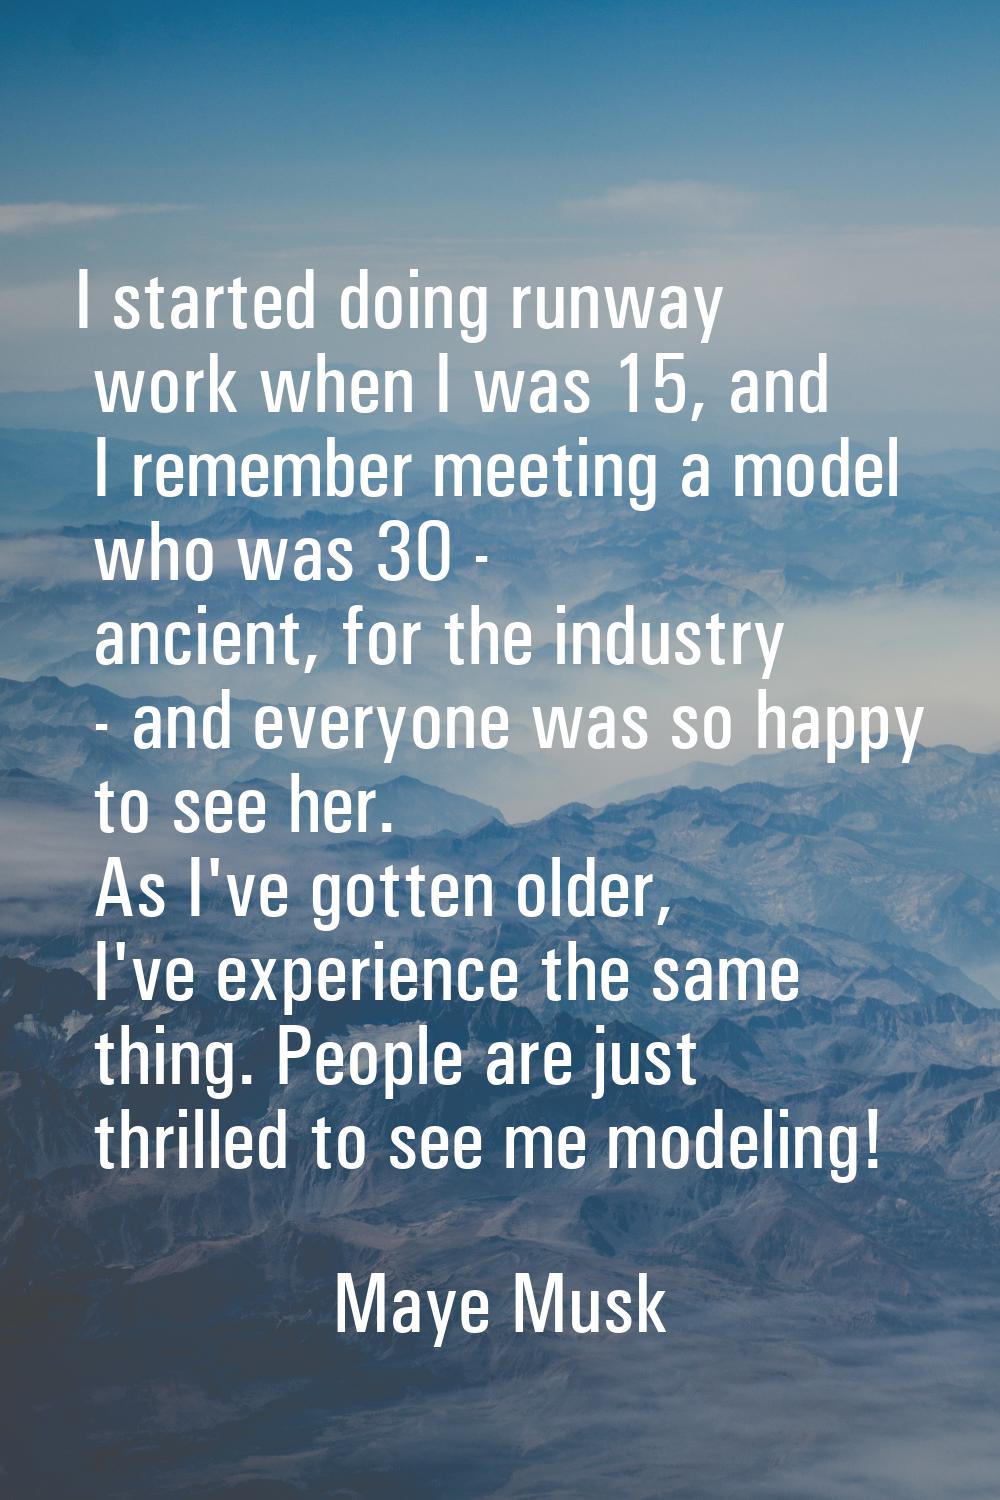 I started doing runway work when I was 15, and I remember meeting a model who was 30 - ancient, for